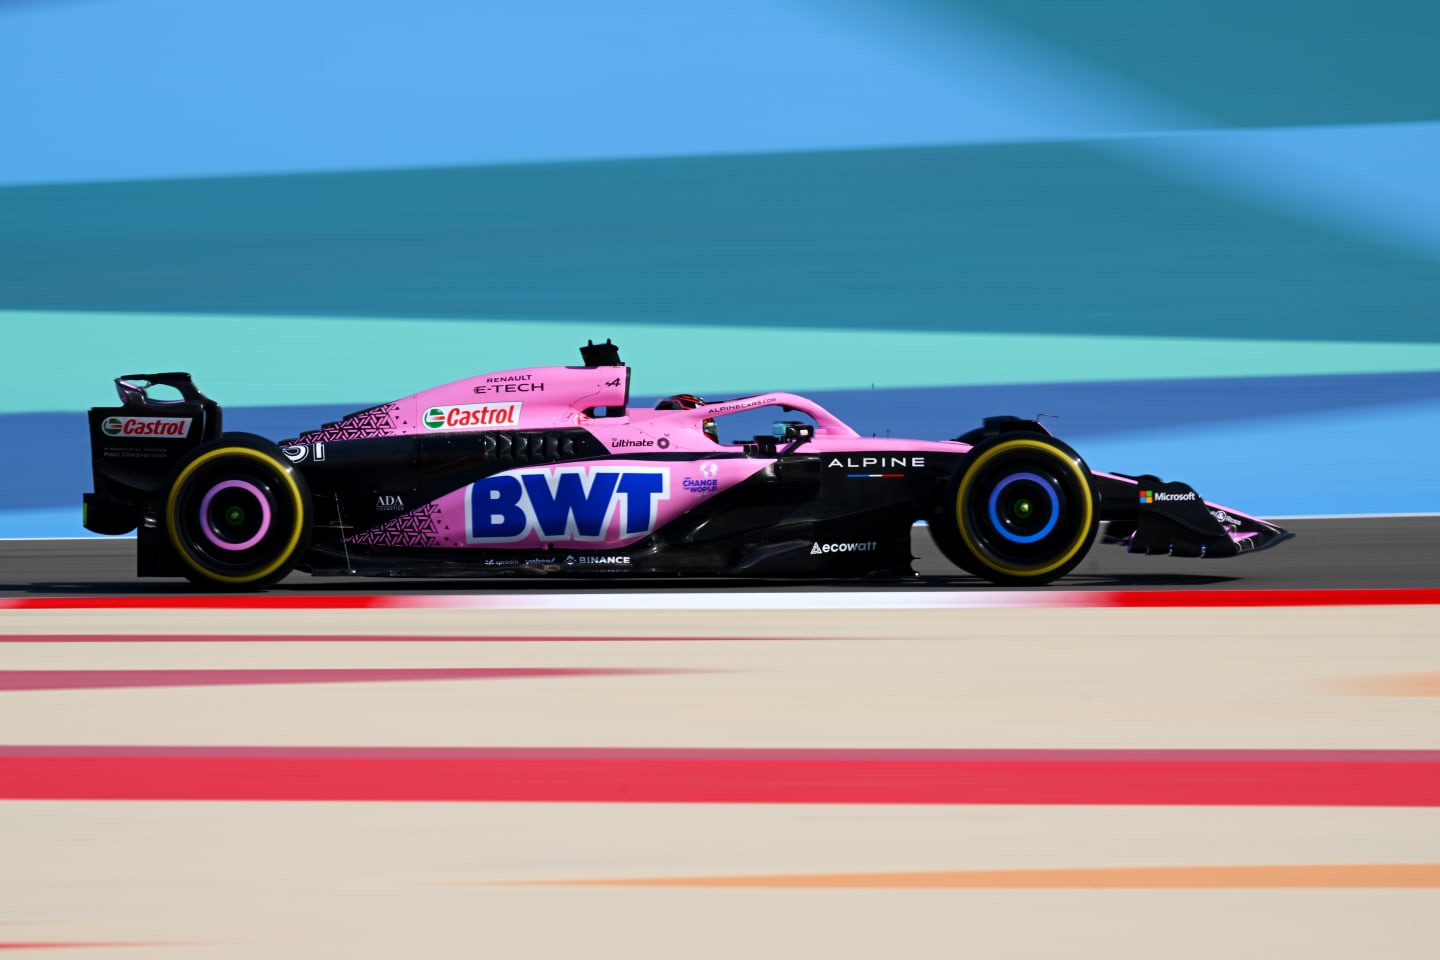 BAHRAIN, BAHRAIN - MARCH 03: Esteban Ocon of France driving the (31) Alpine F1 A523 Renault on track during practice ahead of the F1 Grand Prix of Bahrain at Bahrain International Circuit on March 03, 2023 in Bahrain, Bahrain. (Photo by Clive Mason/Getty Images)